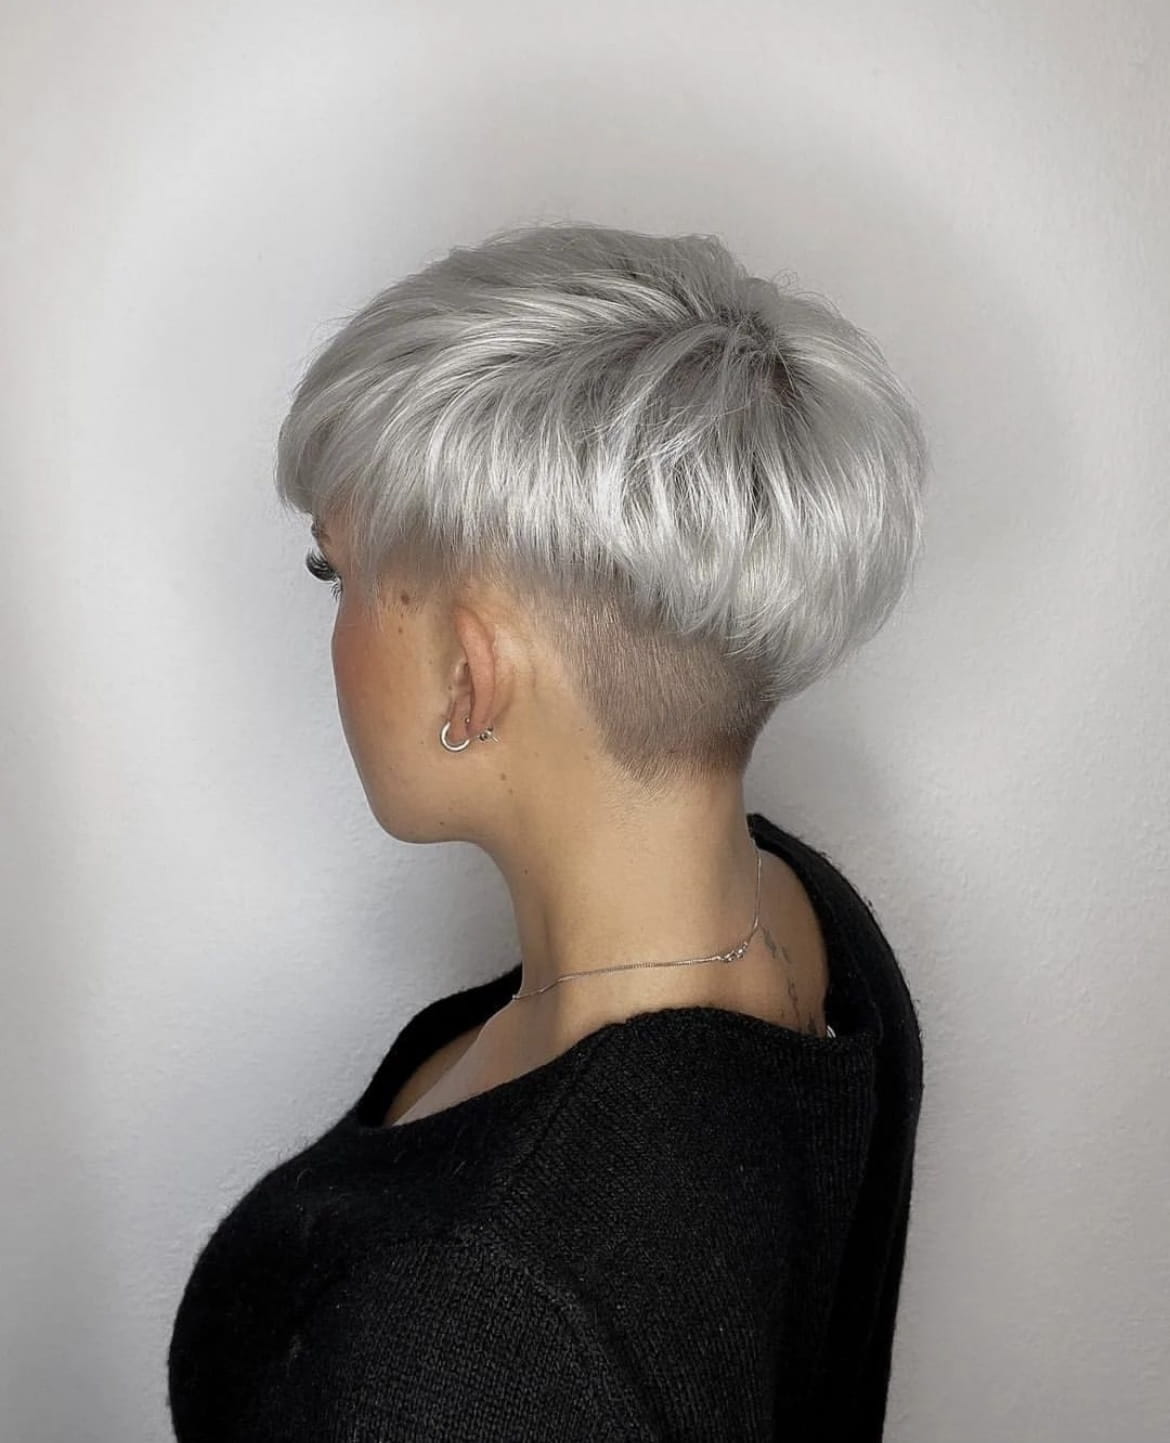 100+ Best Short Hairstyles & Haircuts For Women images 29